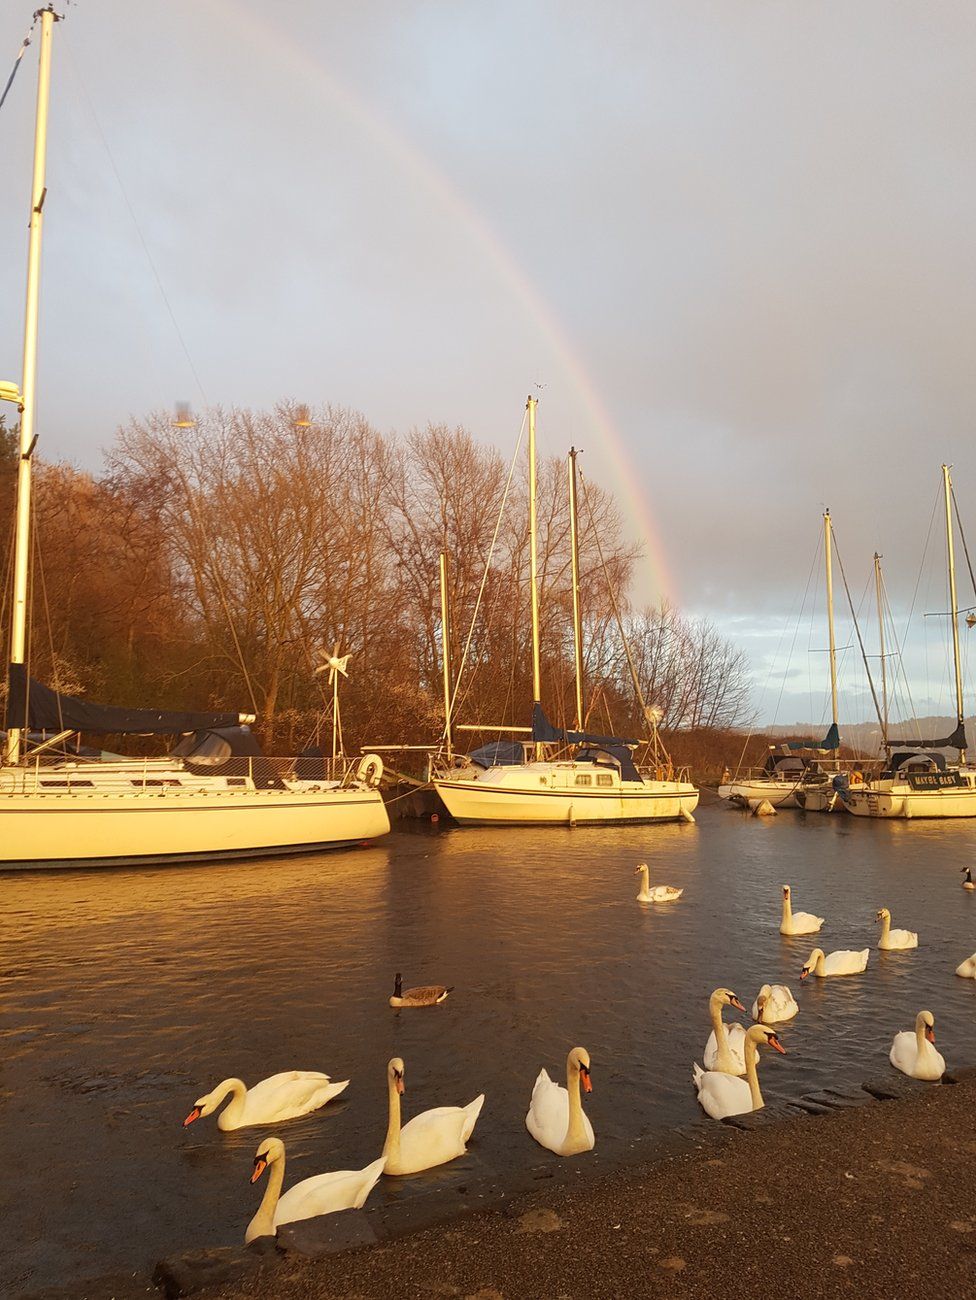 Swans swimming in water under a rainbow